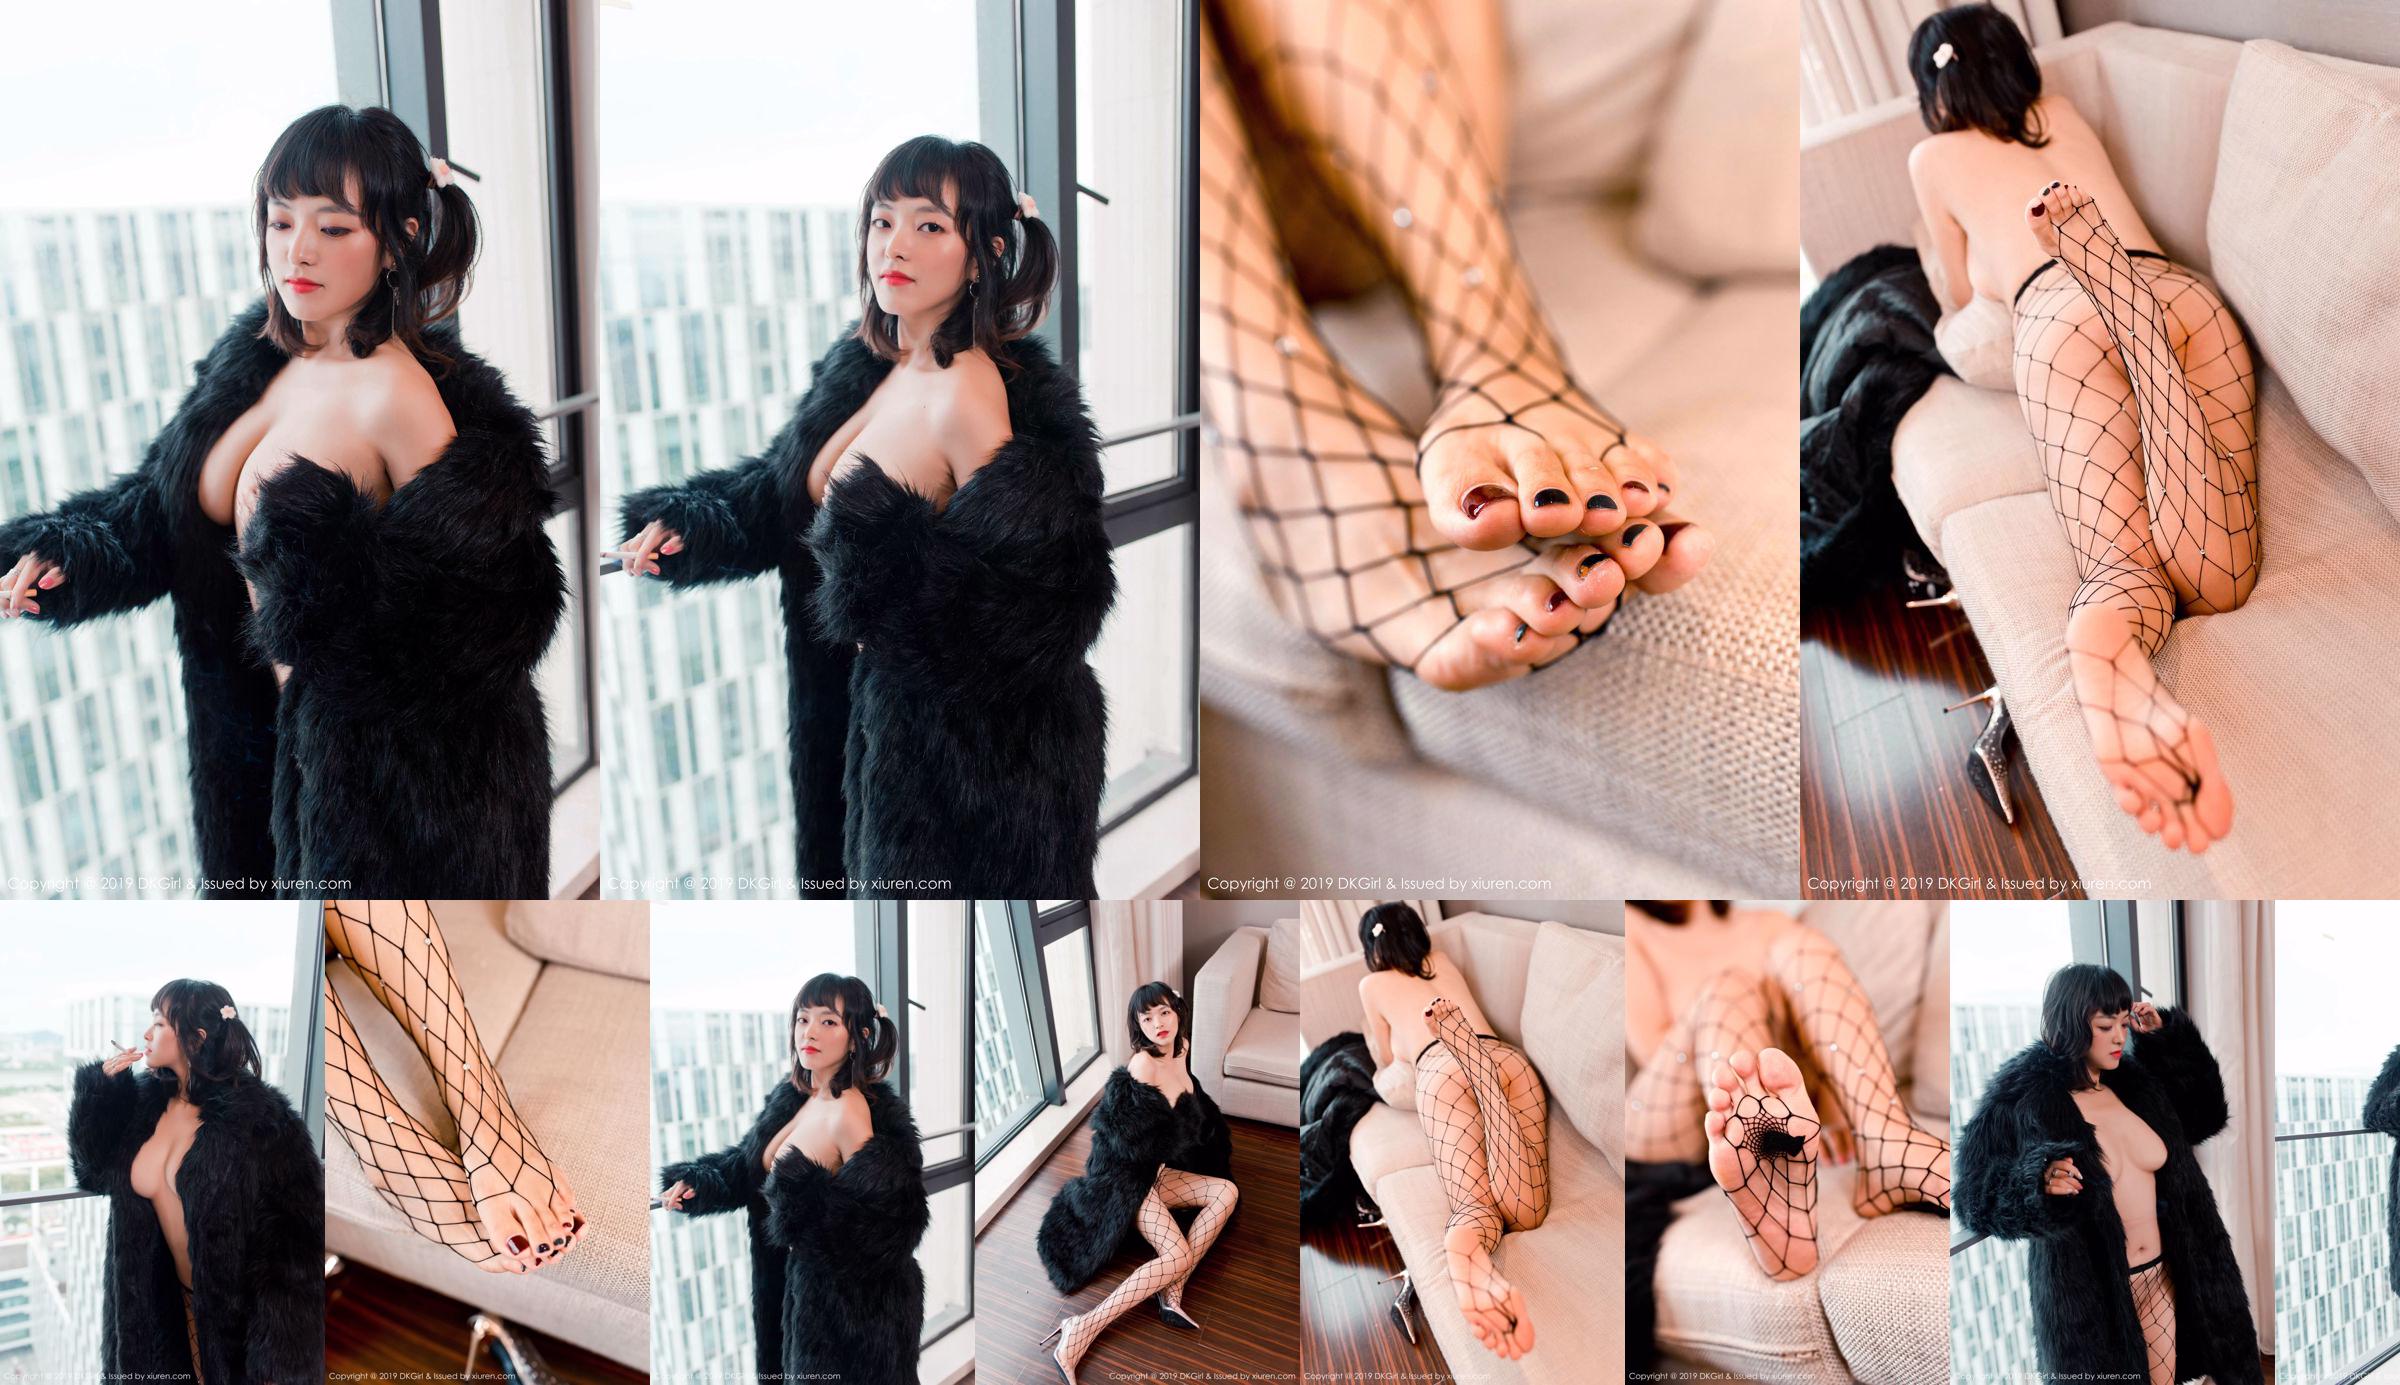 Zhang Huahua "Mature Woman in Fur Net Stockings" [DKGirl] Vol.118 No.927af5 Page 1